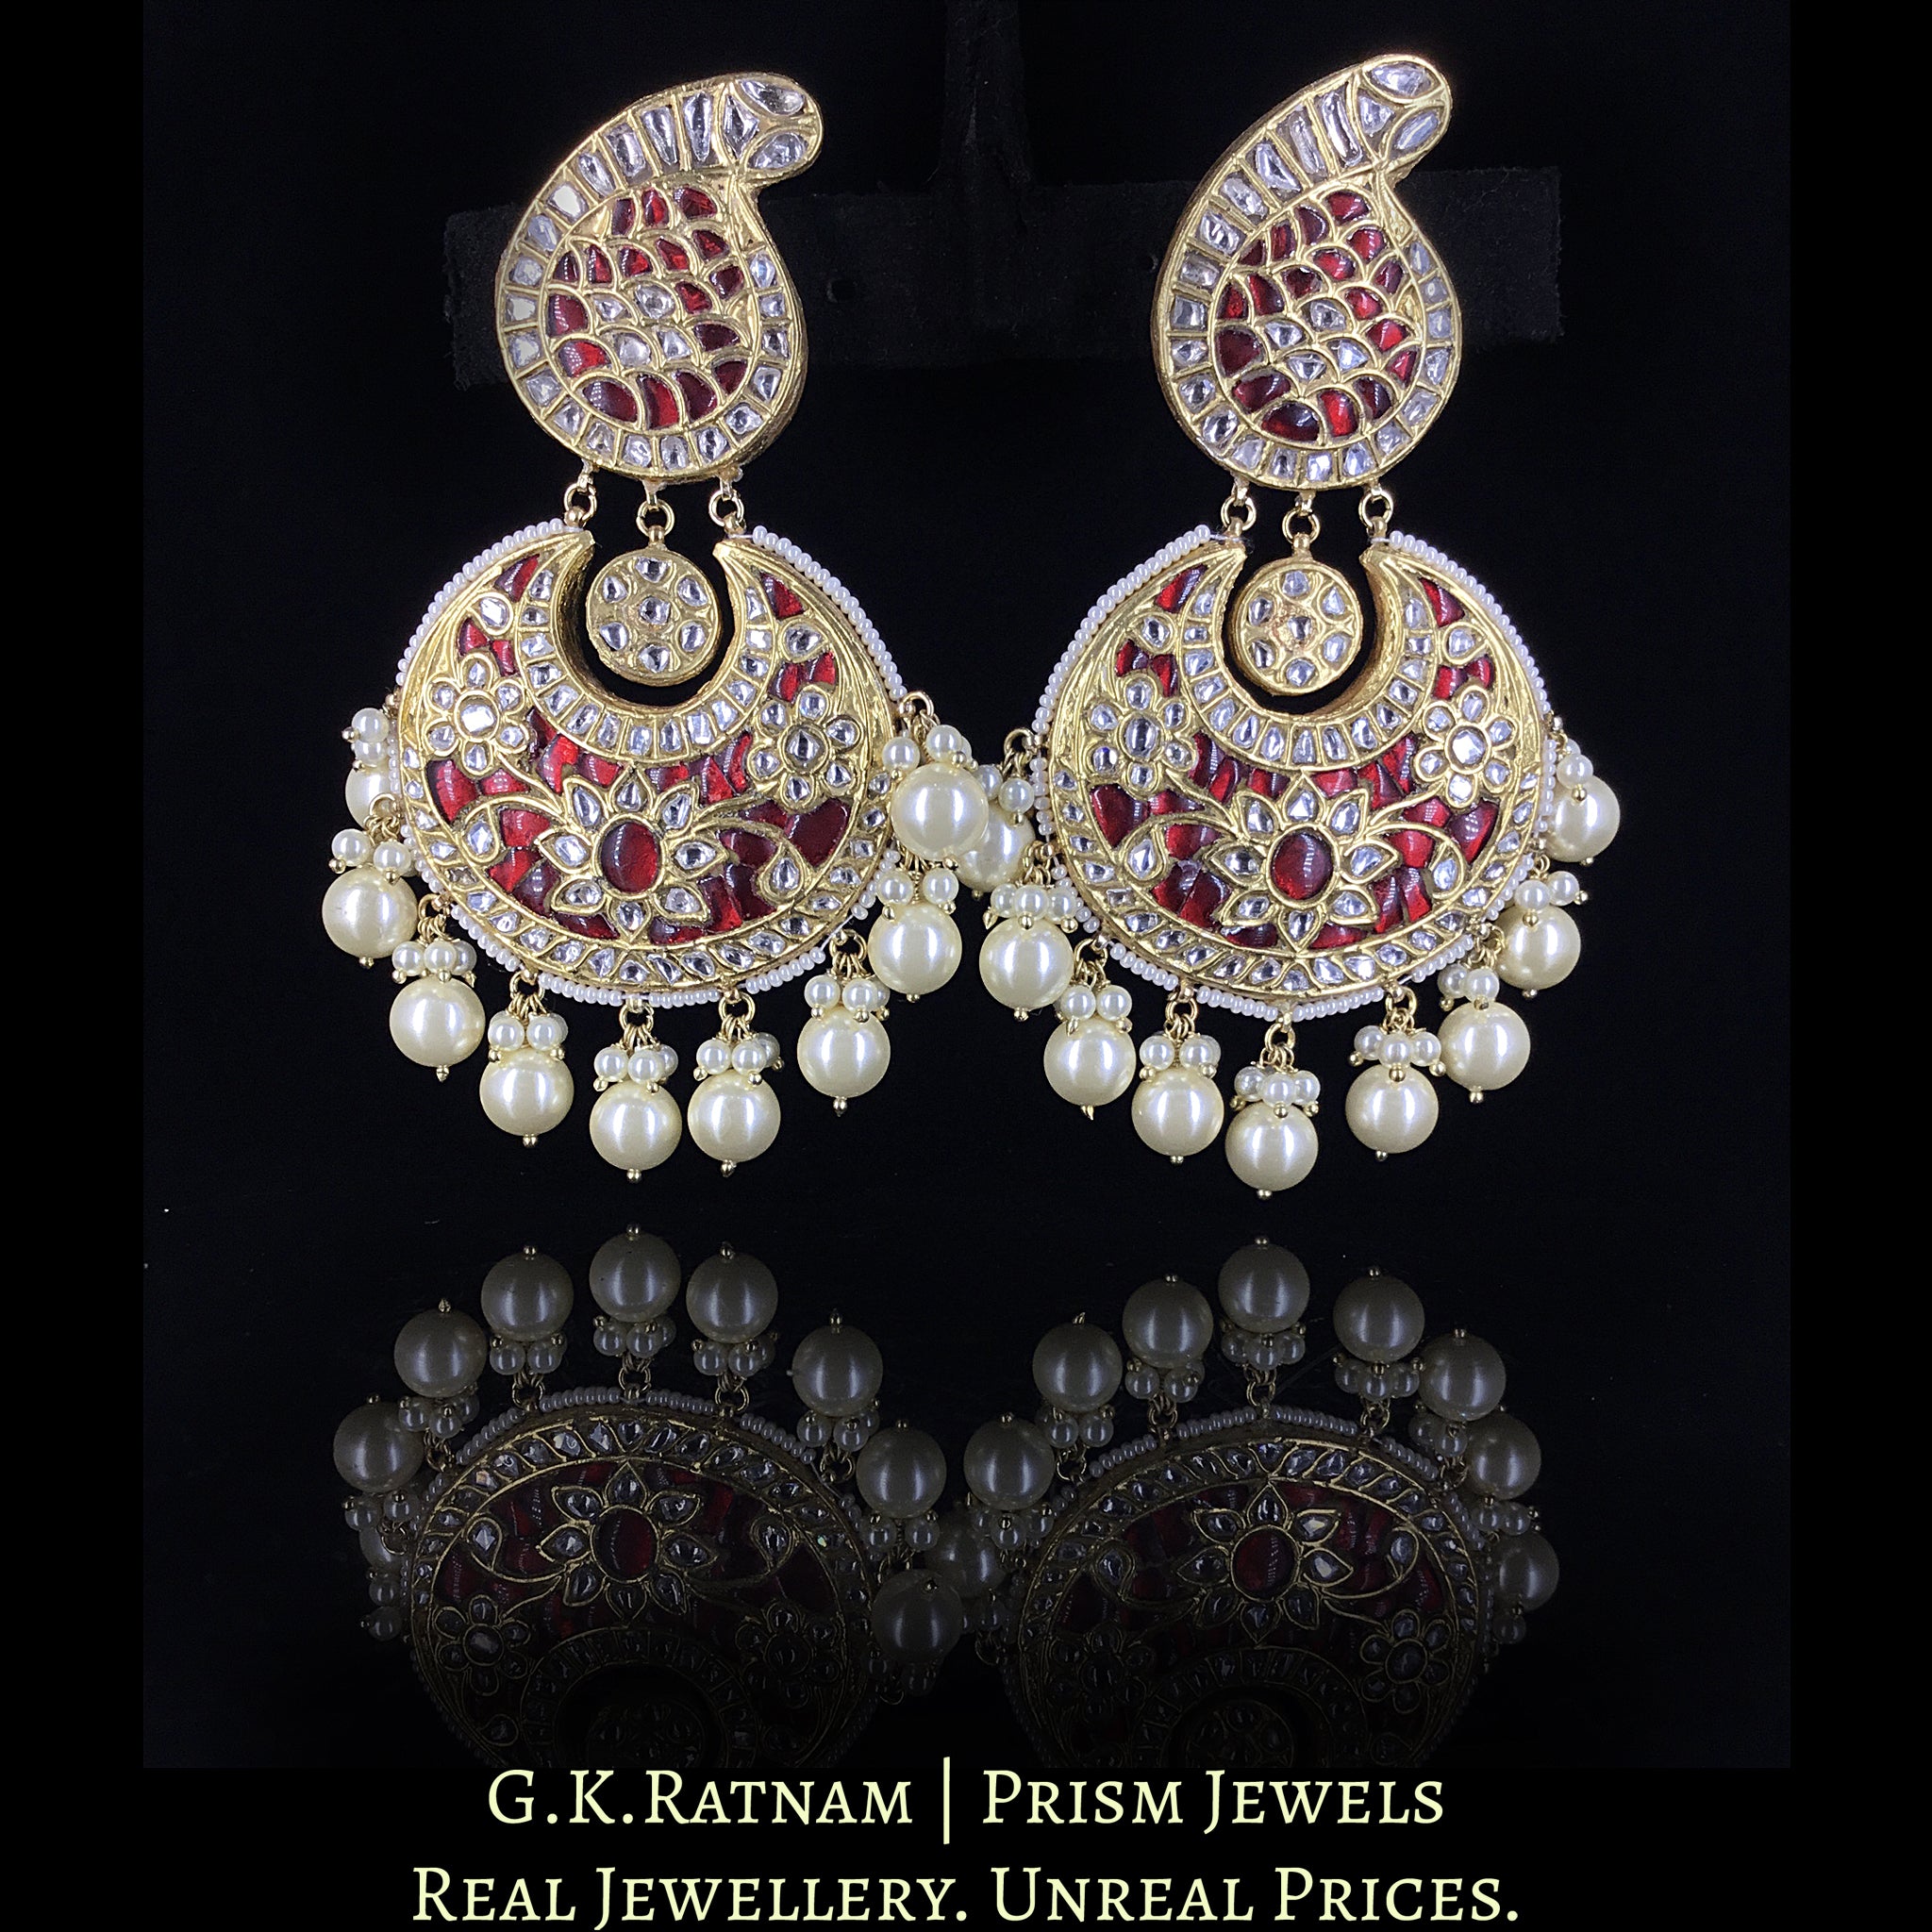 23k Gold and Diamond Polki Red Chand Bali Earring Pair With Pearls